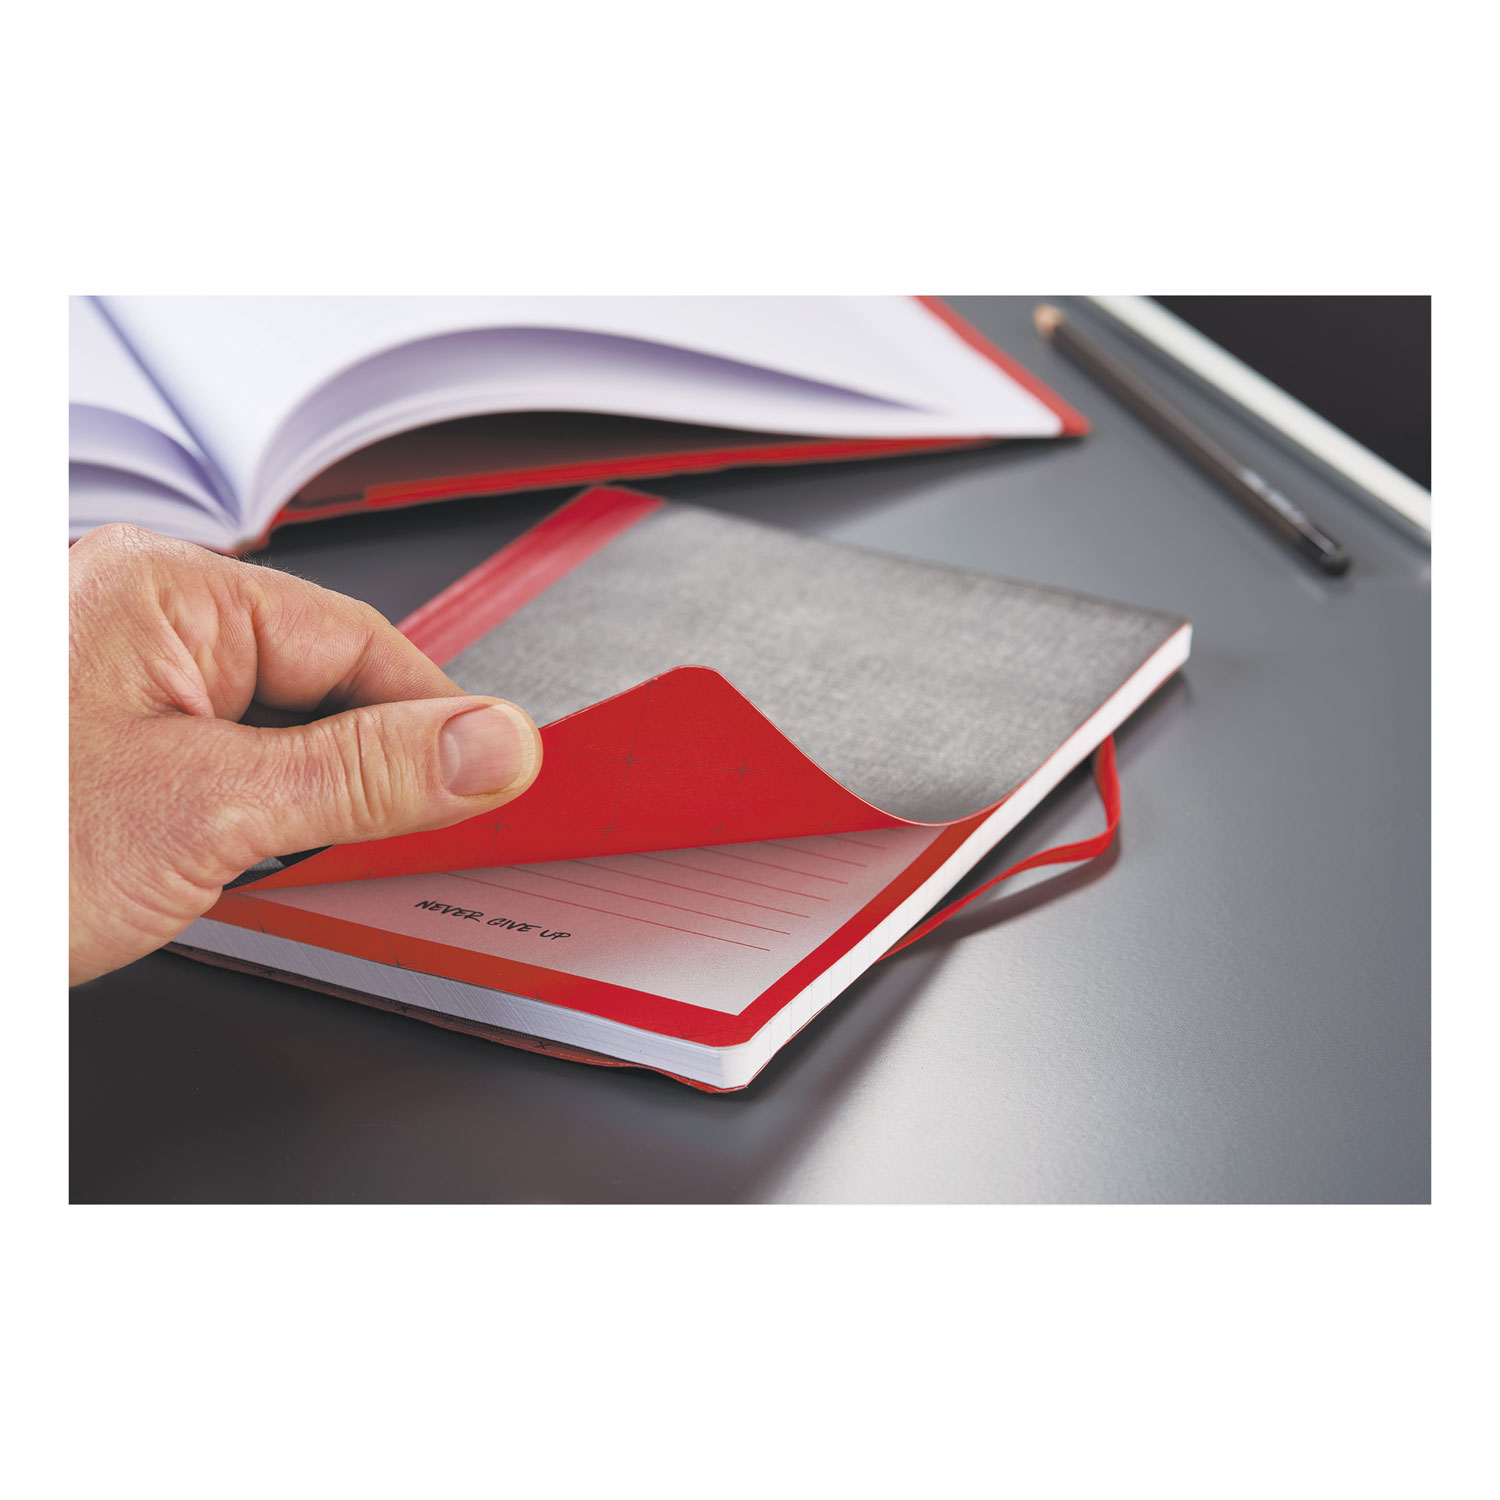  Black n' Red 400110478 Flexible Casebound Notebooks, 1 Subject, Wide/Legal Rule, Black/Red Cover, 11.75 x 8.38, 72 Sheets (JDK400110478) 